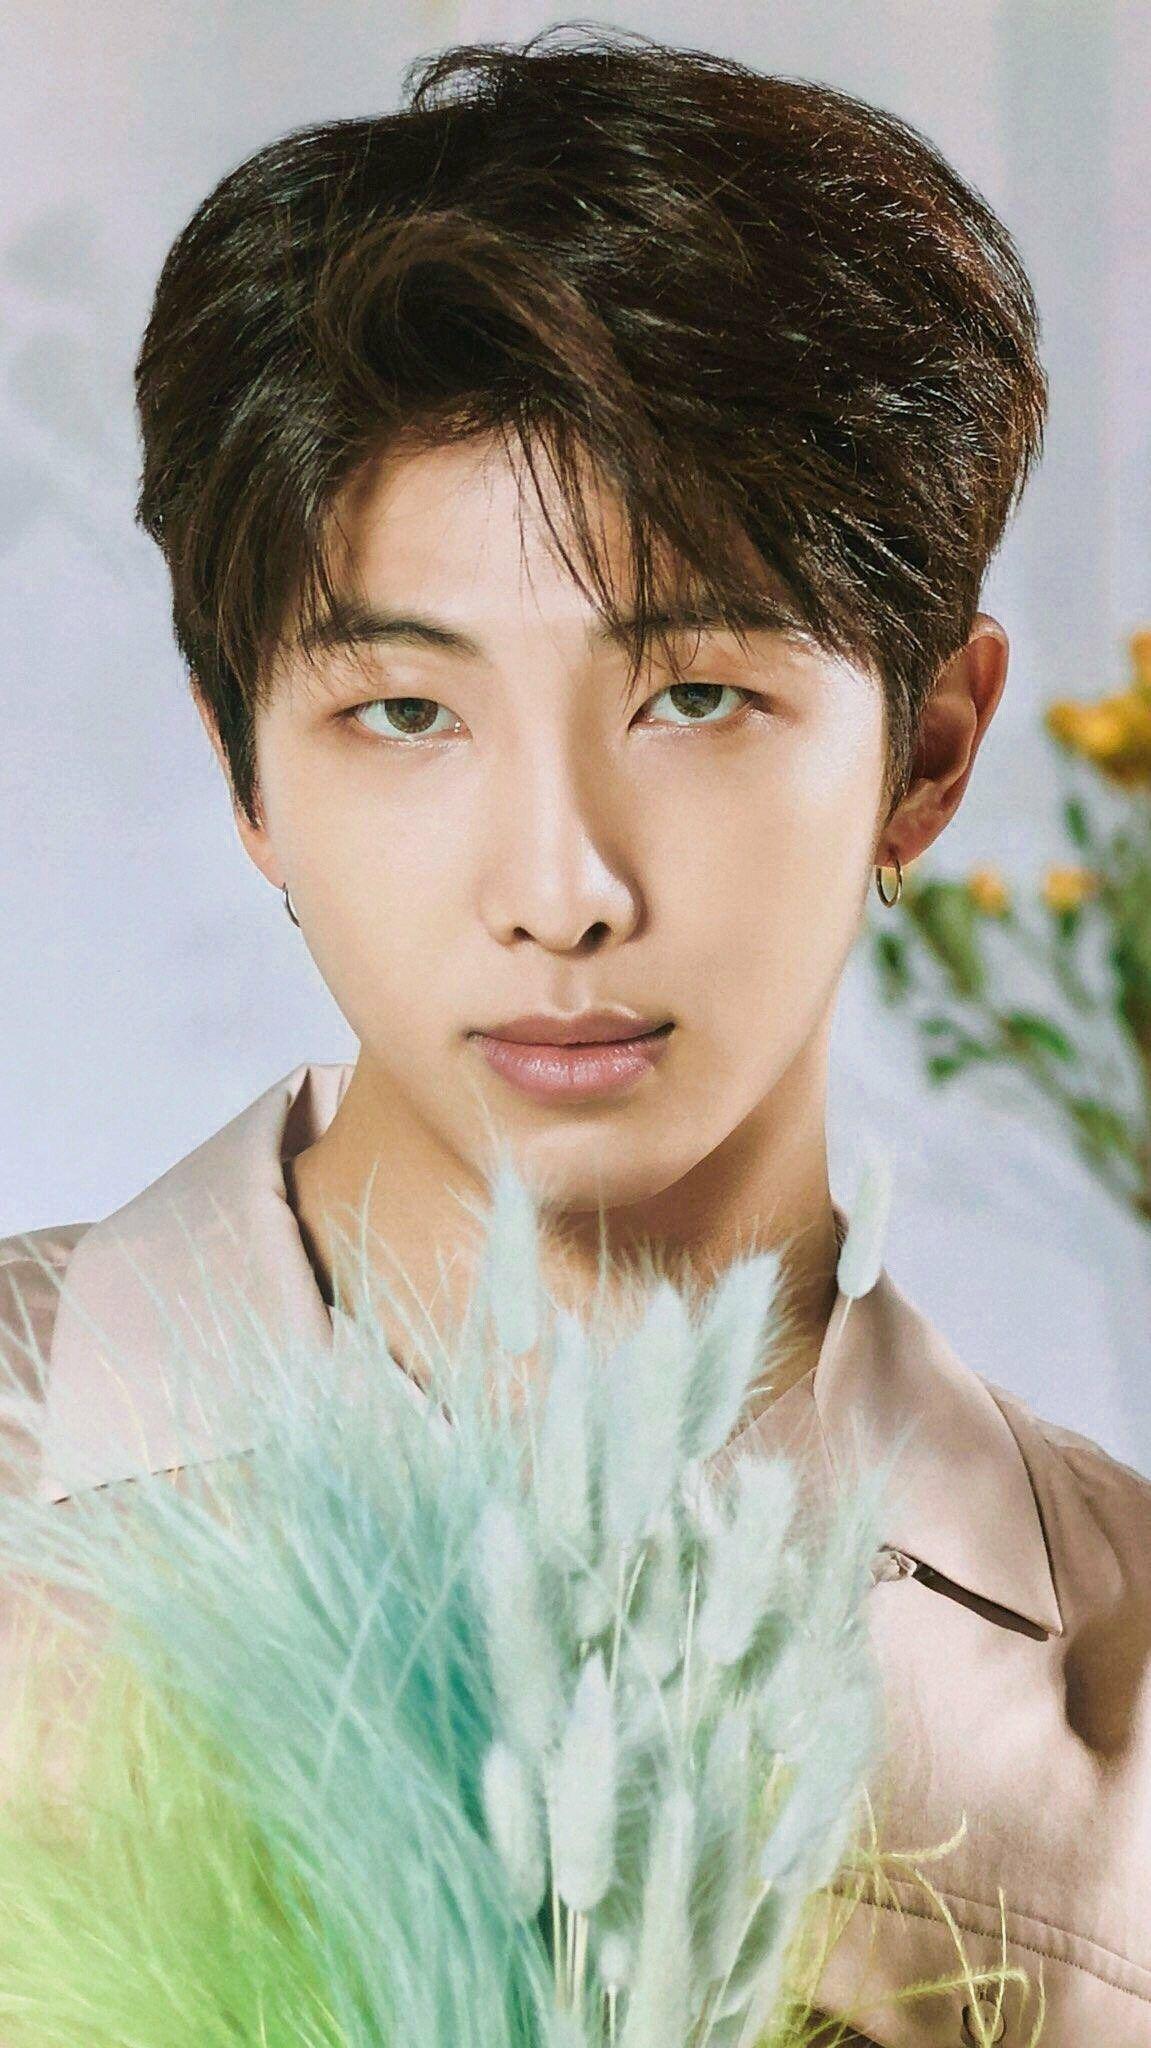 RM BTS WORLD TOUR 'LOVE YOURSELF' SEOUL MD POSTER SET SCAN